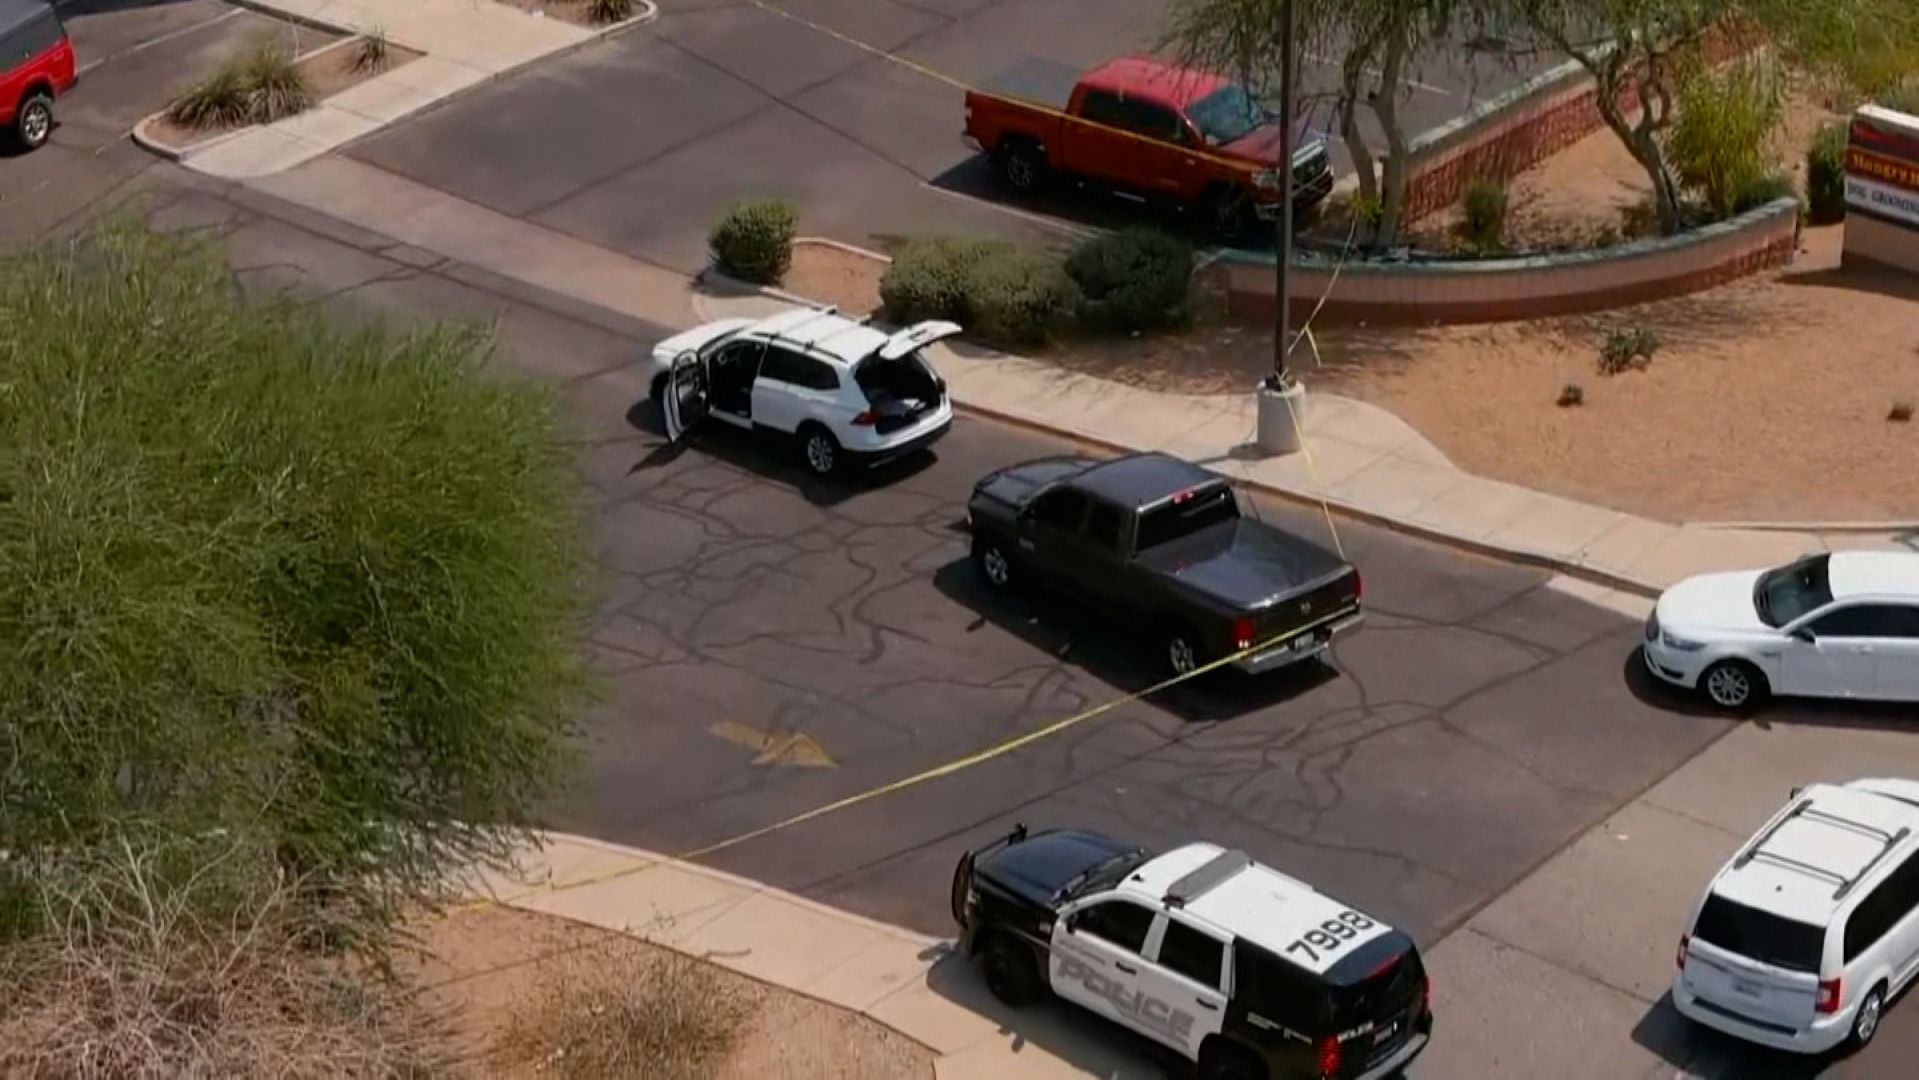 CNN affiliate KPHO/KTVK aerial video shows a white SUV the station reported was the suspect's vehicle. 